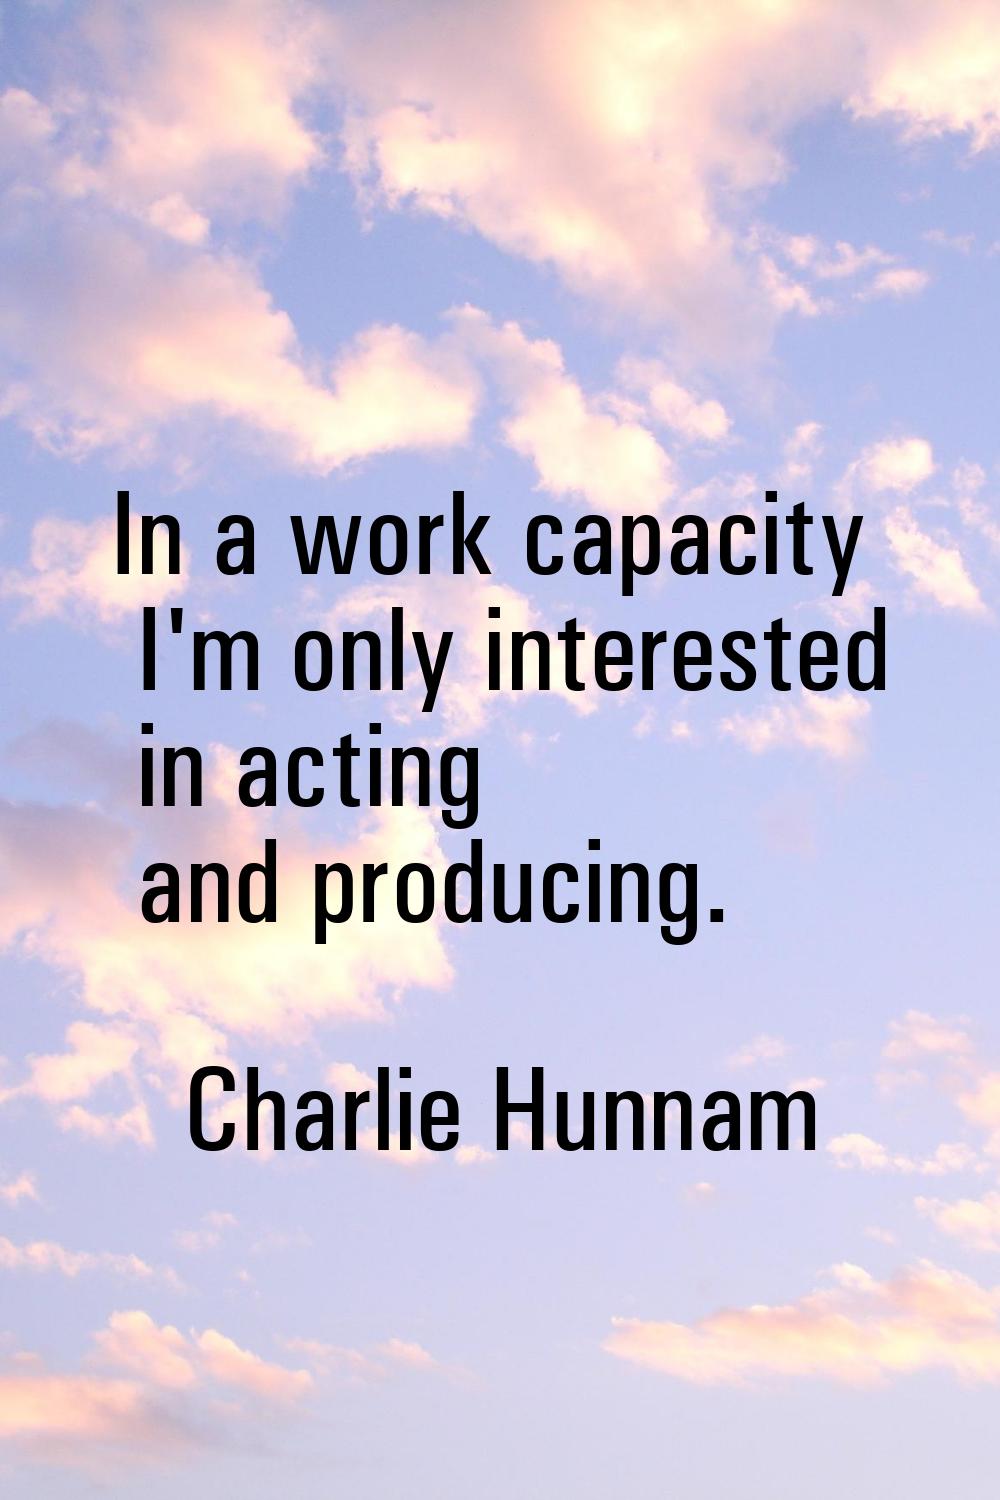 In a work capacity I'm only interested in acting and producing.